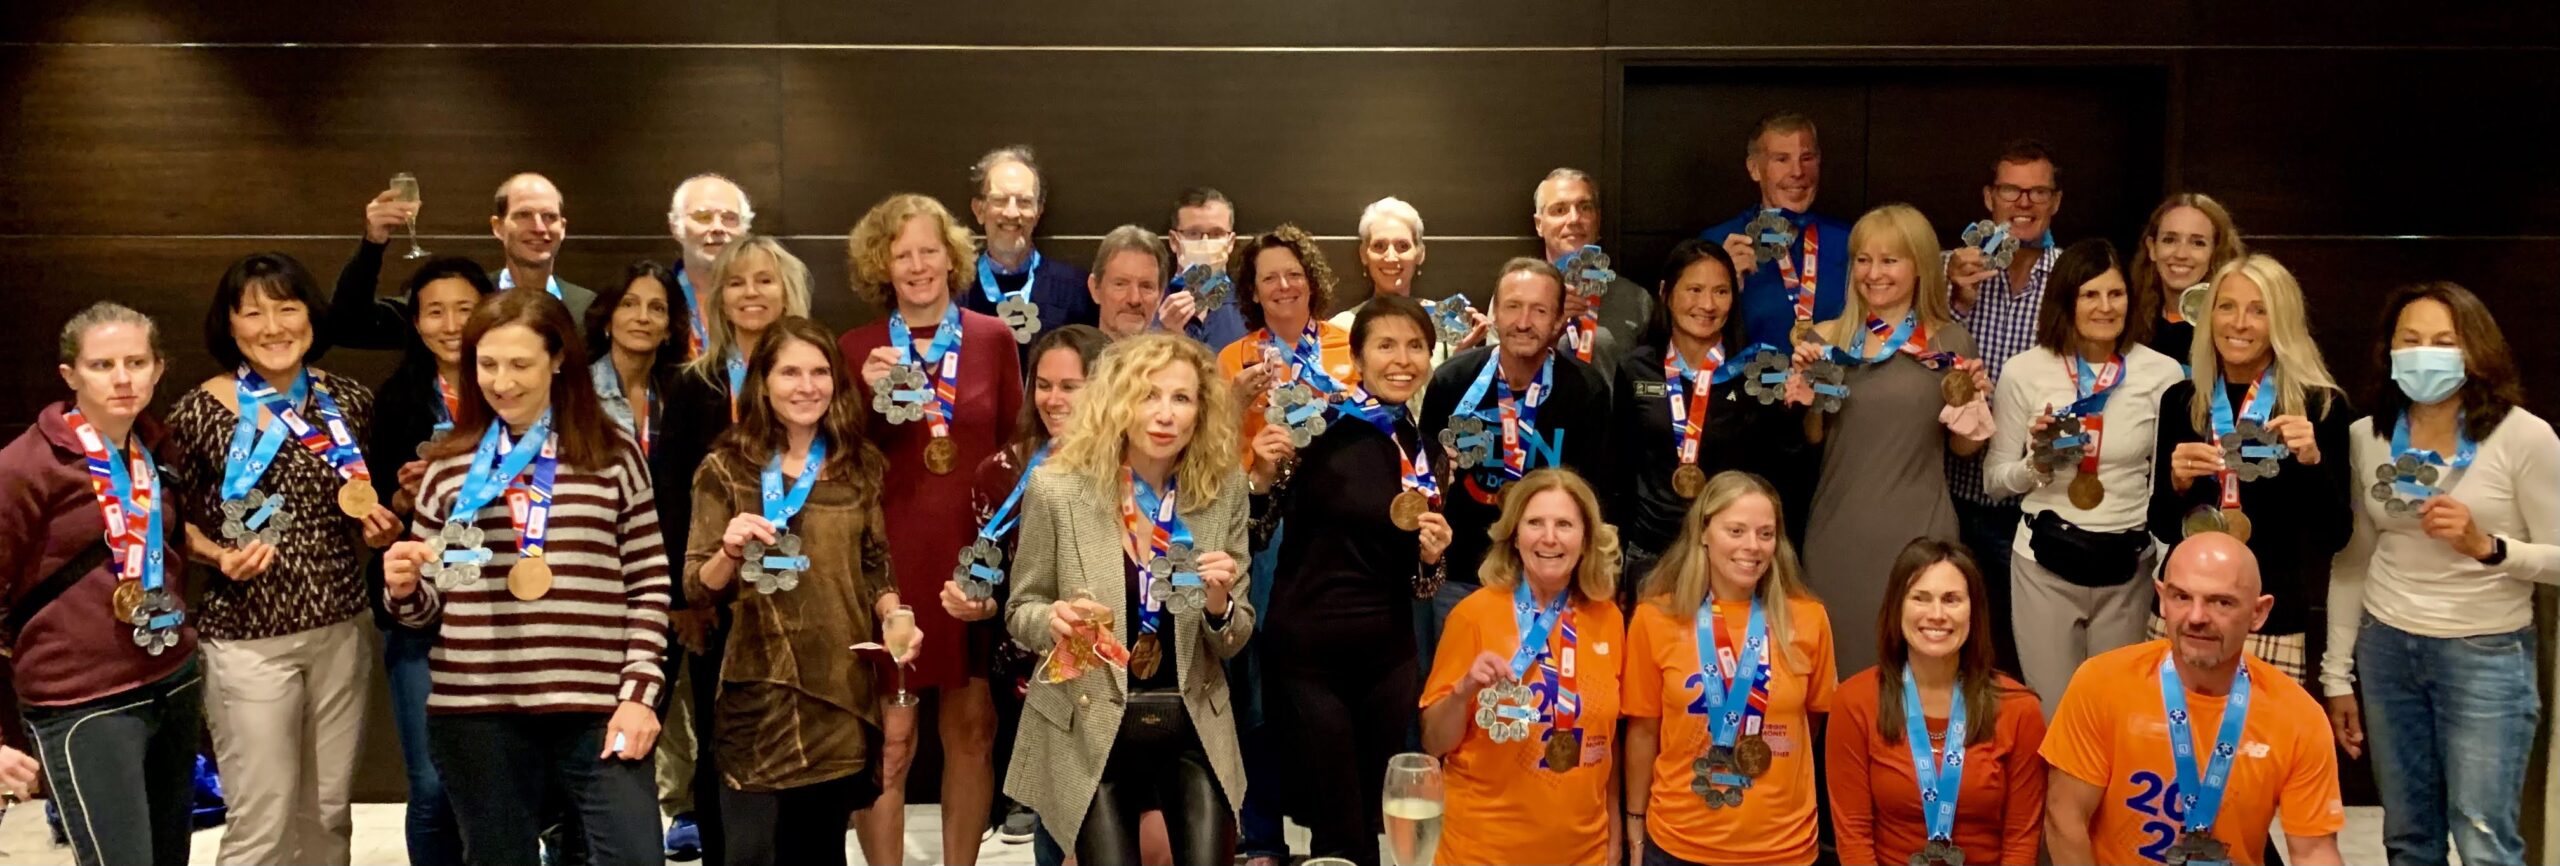 Picture of runners who have travelled with Marathon Tours & Travel who have also completed multiple Abbott World Marathon Major races